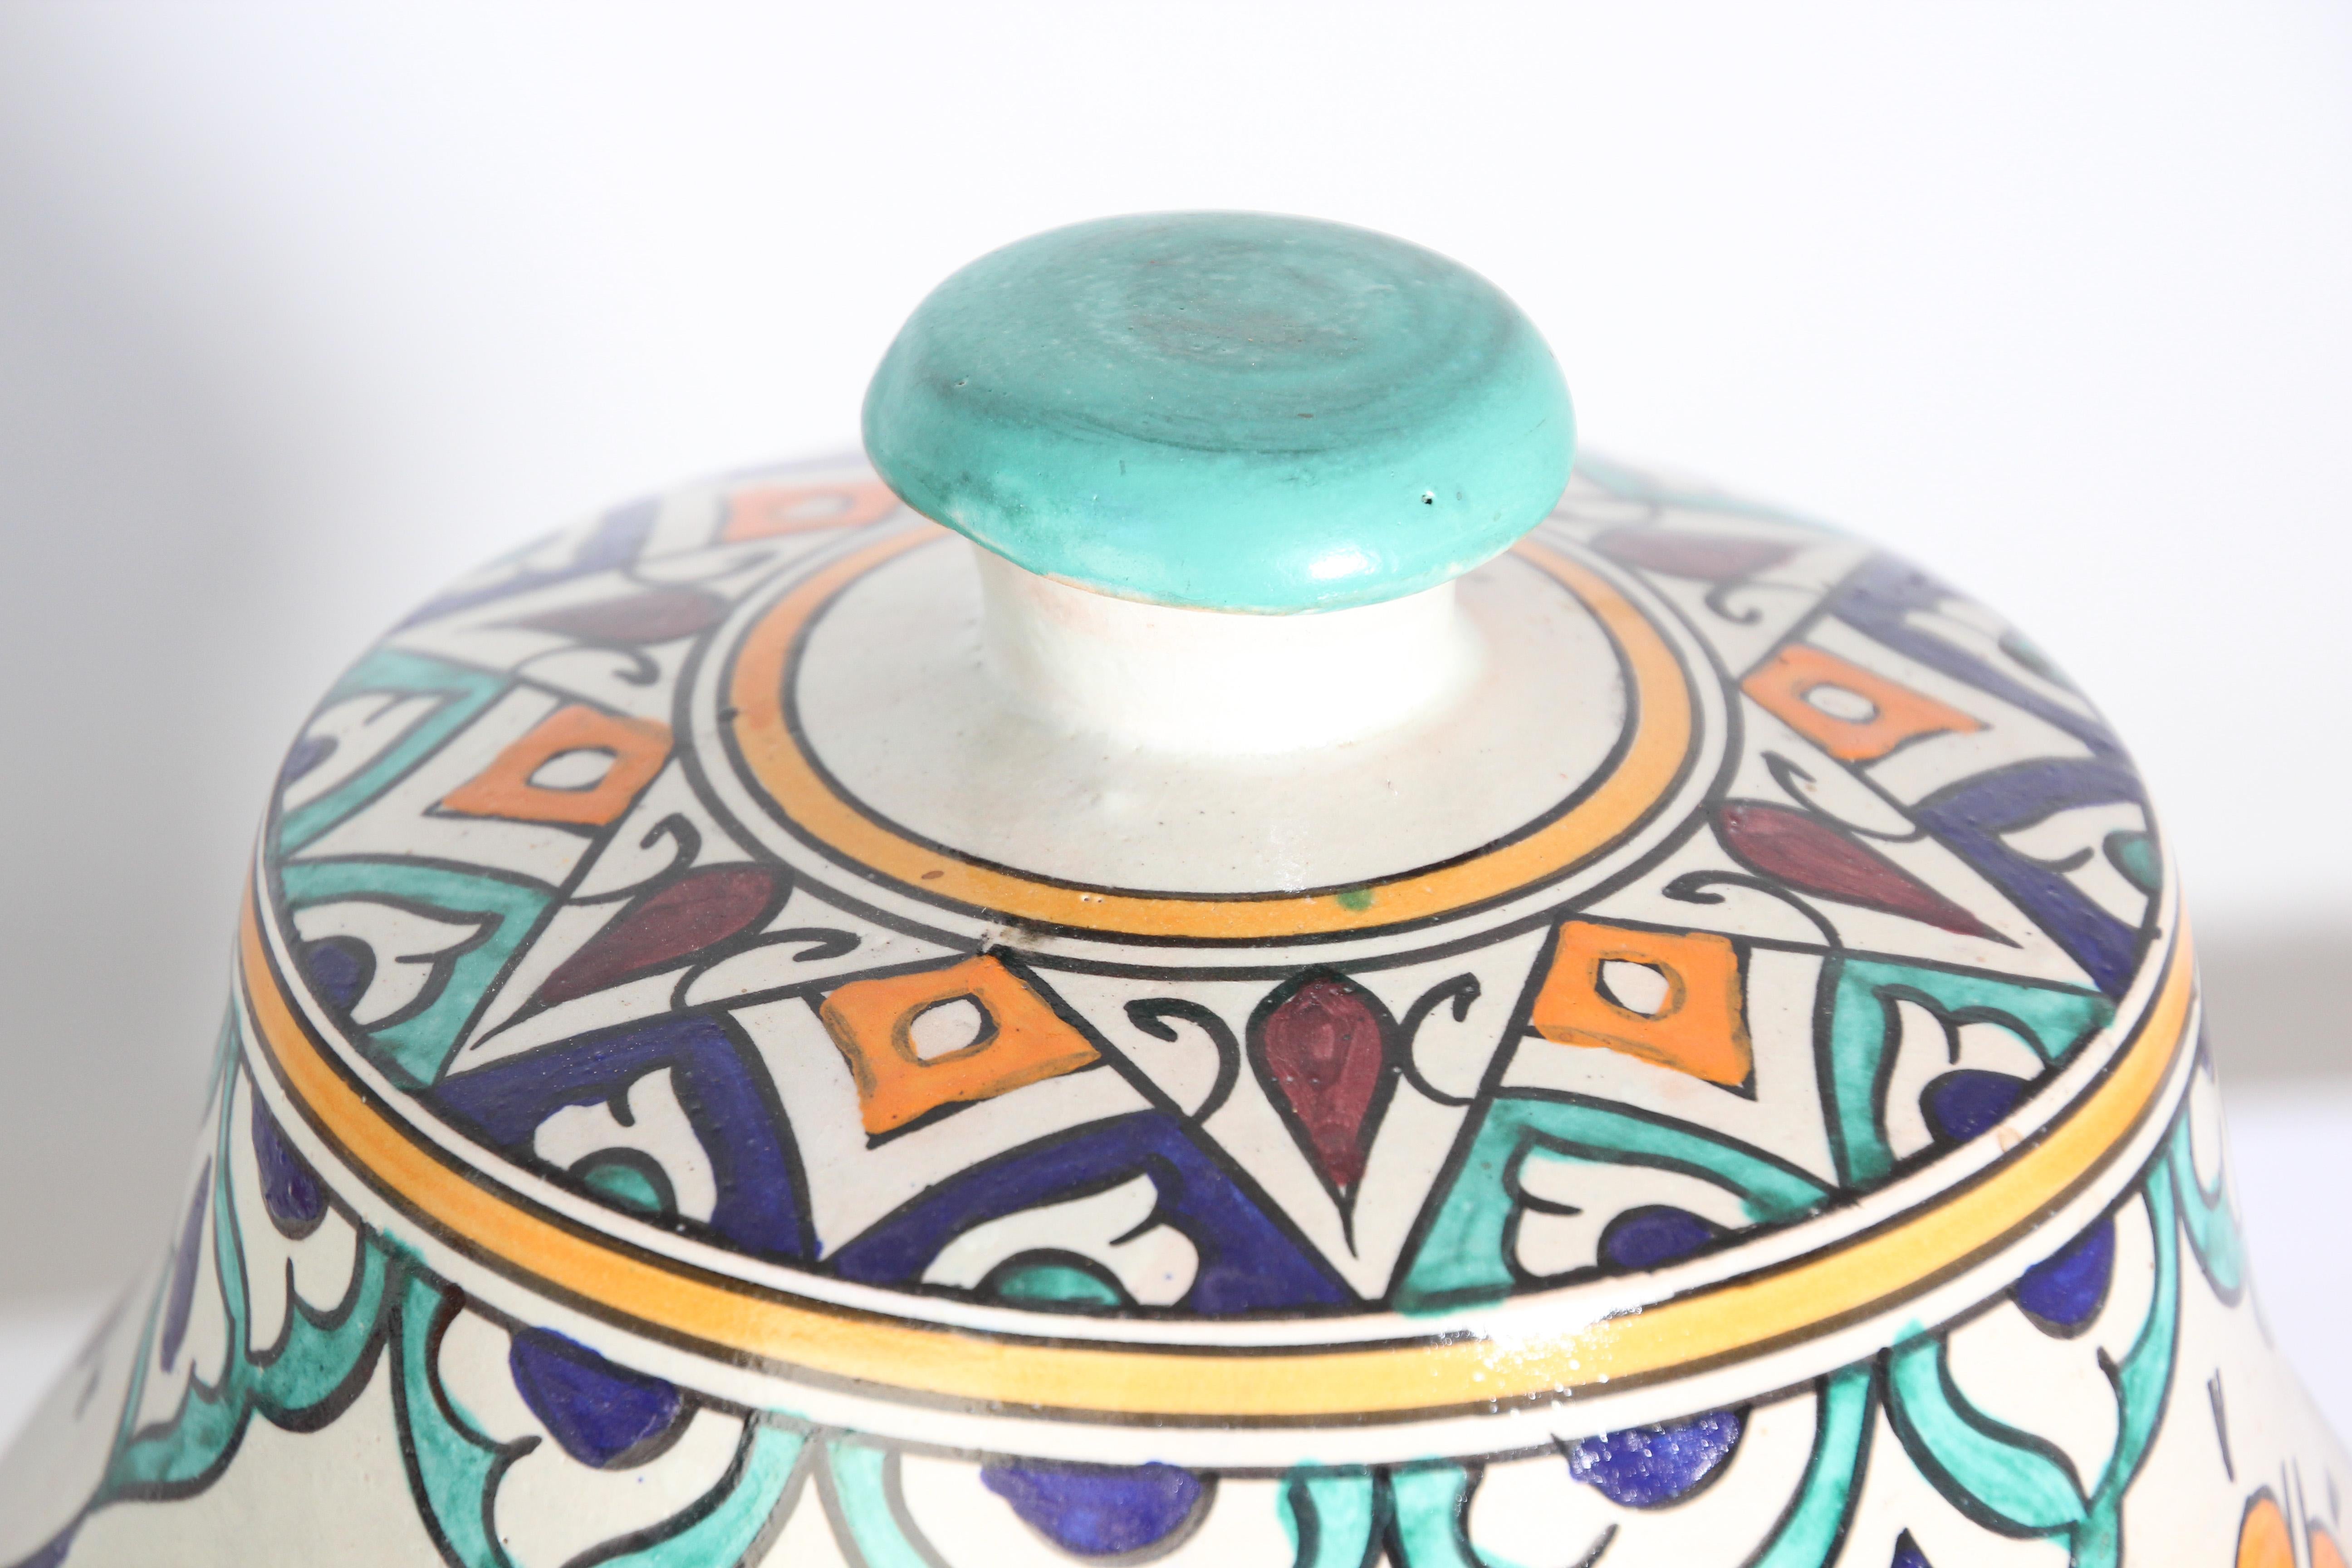 Moorish Ceramic Glazed Covered Urns Handcrafted in Fez Morocco For Sale 8